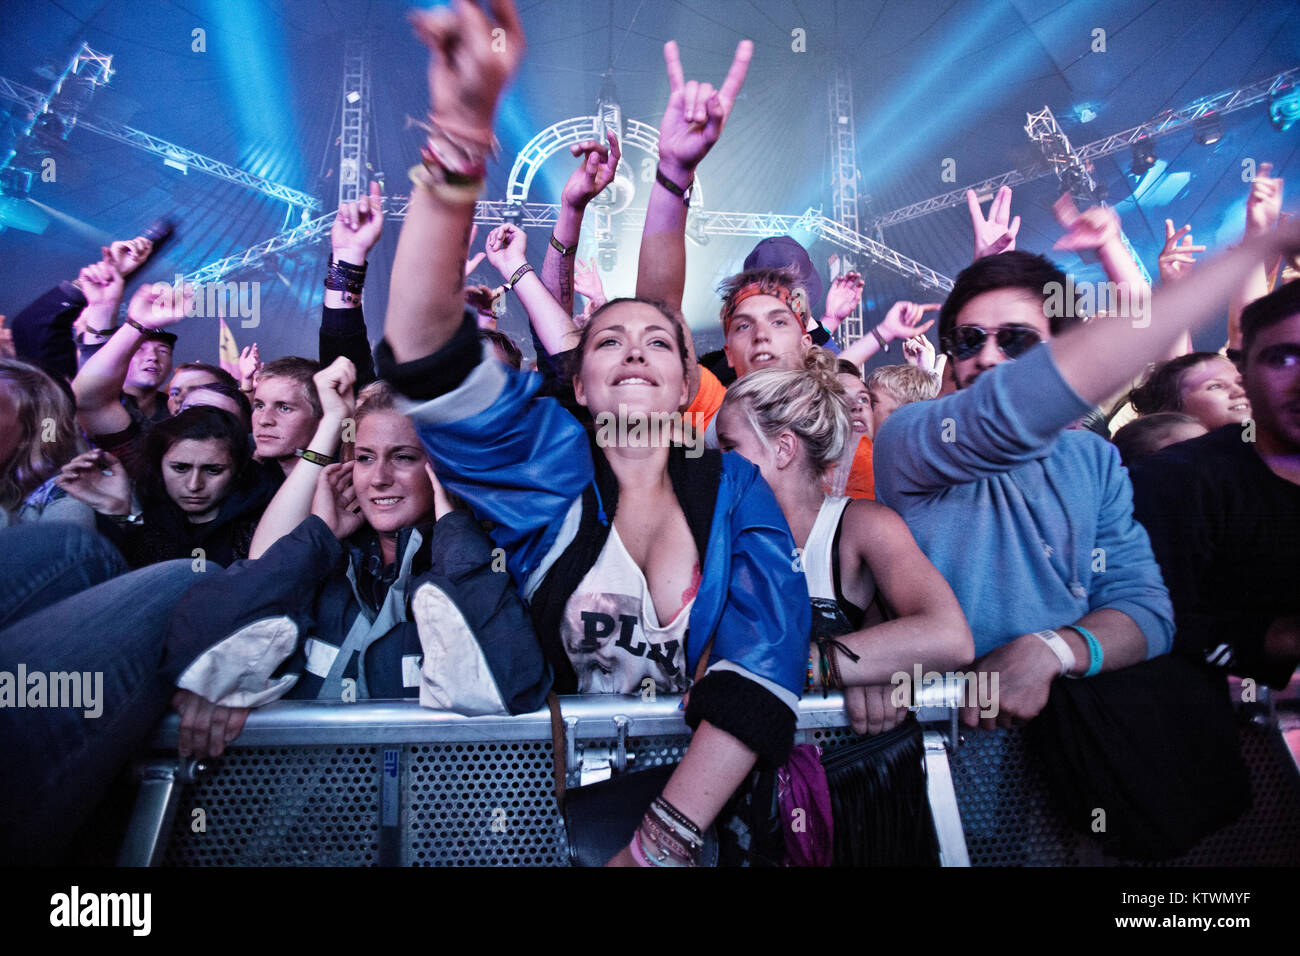 Energetic music fans and festival goers have a great time front row at a concert with the British electronic music duo Chase & Status who performs live concert Roskilde Festival 2011. Denmark, 30/06 2011. Stock Photo